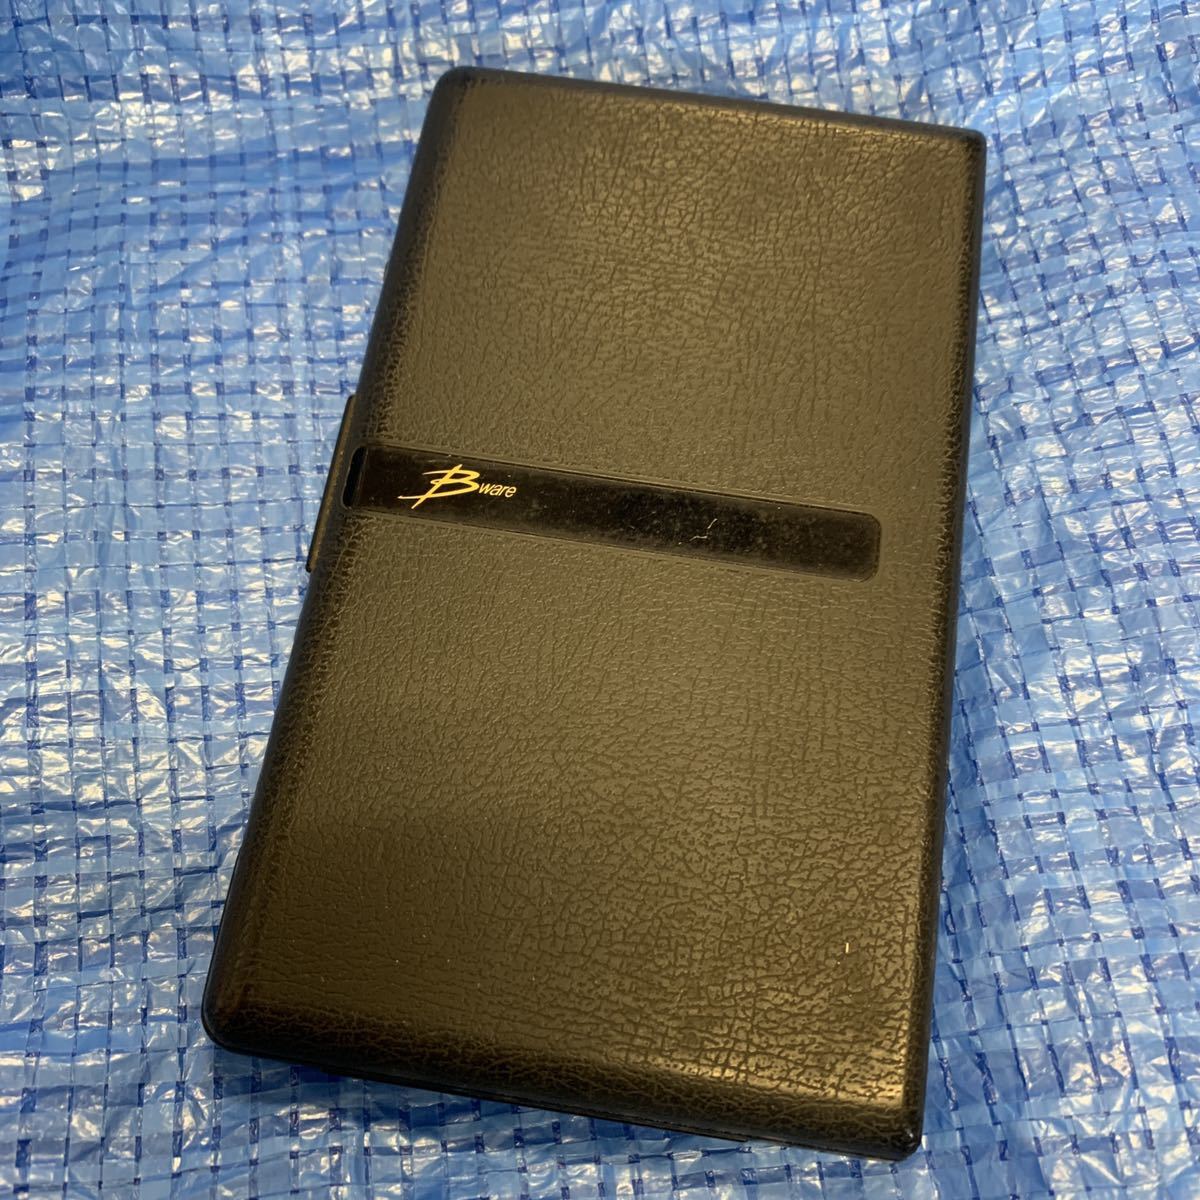 [ size 60. shipping ]SHARP sharp PA-8600 electron personal organiser battery replaced Showa Retro at that time goods electrification has confirmed operation precision not yet verification goods 